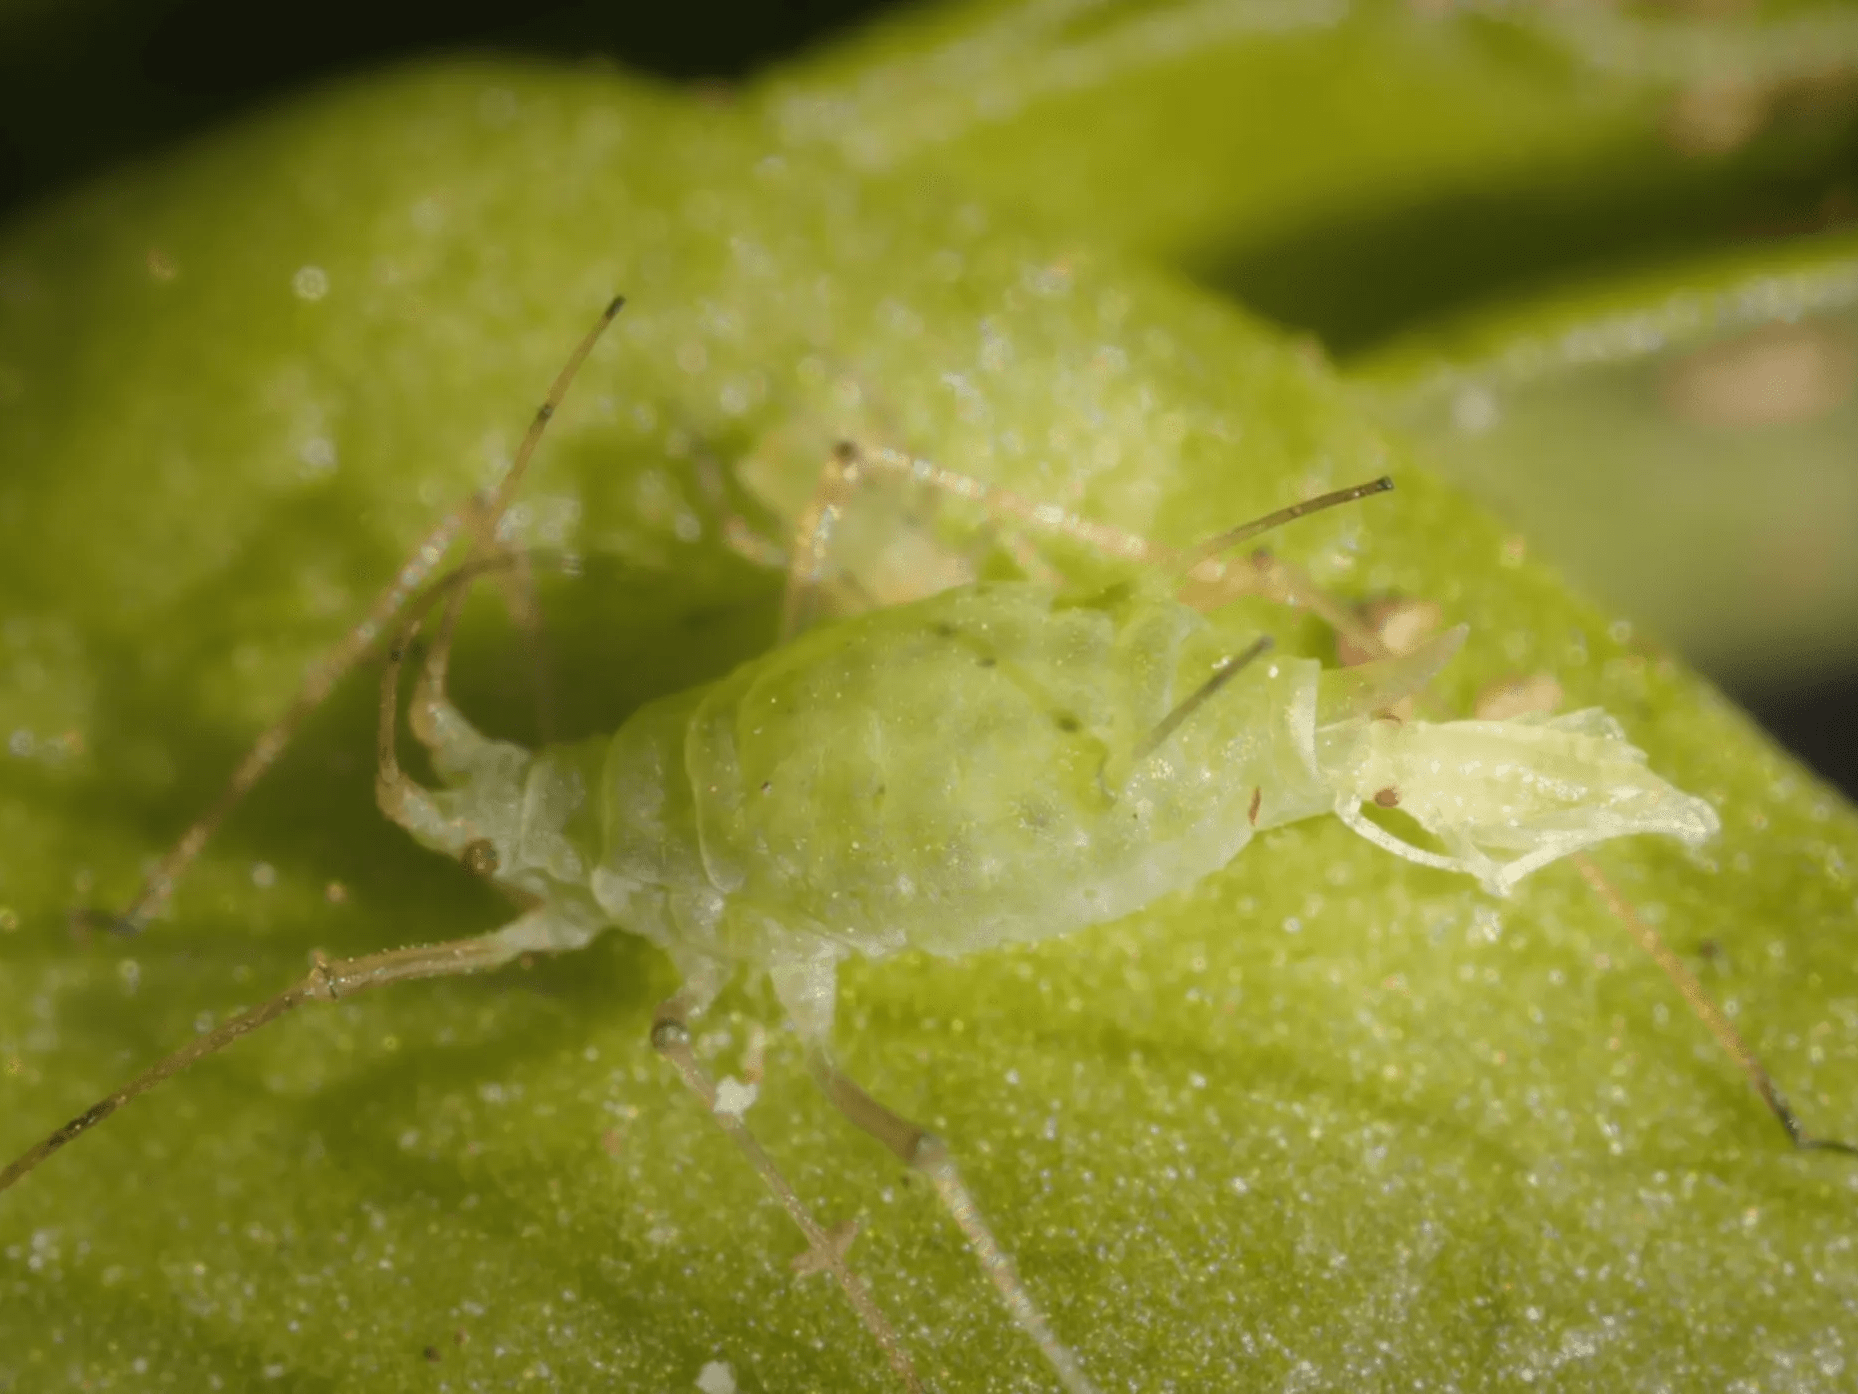 Aphids are a common pest on cannabis plants